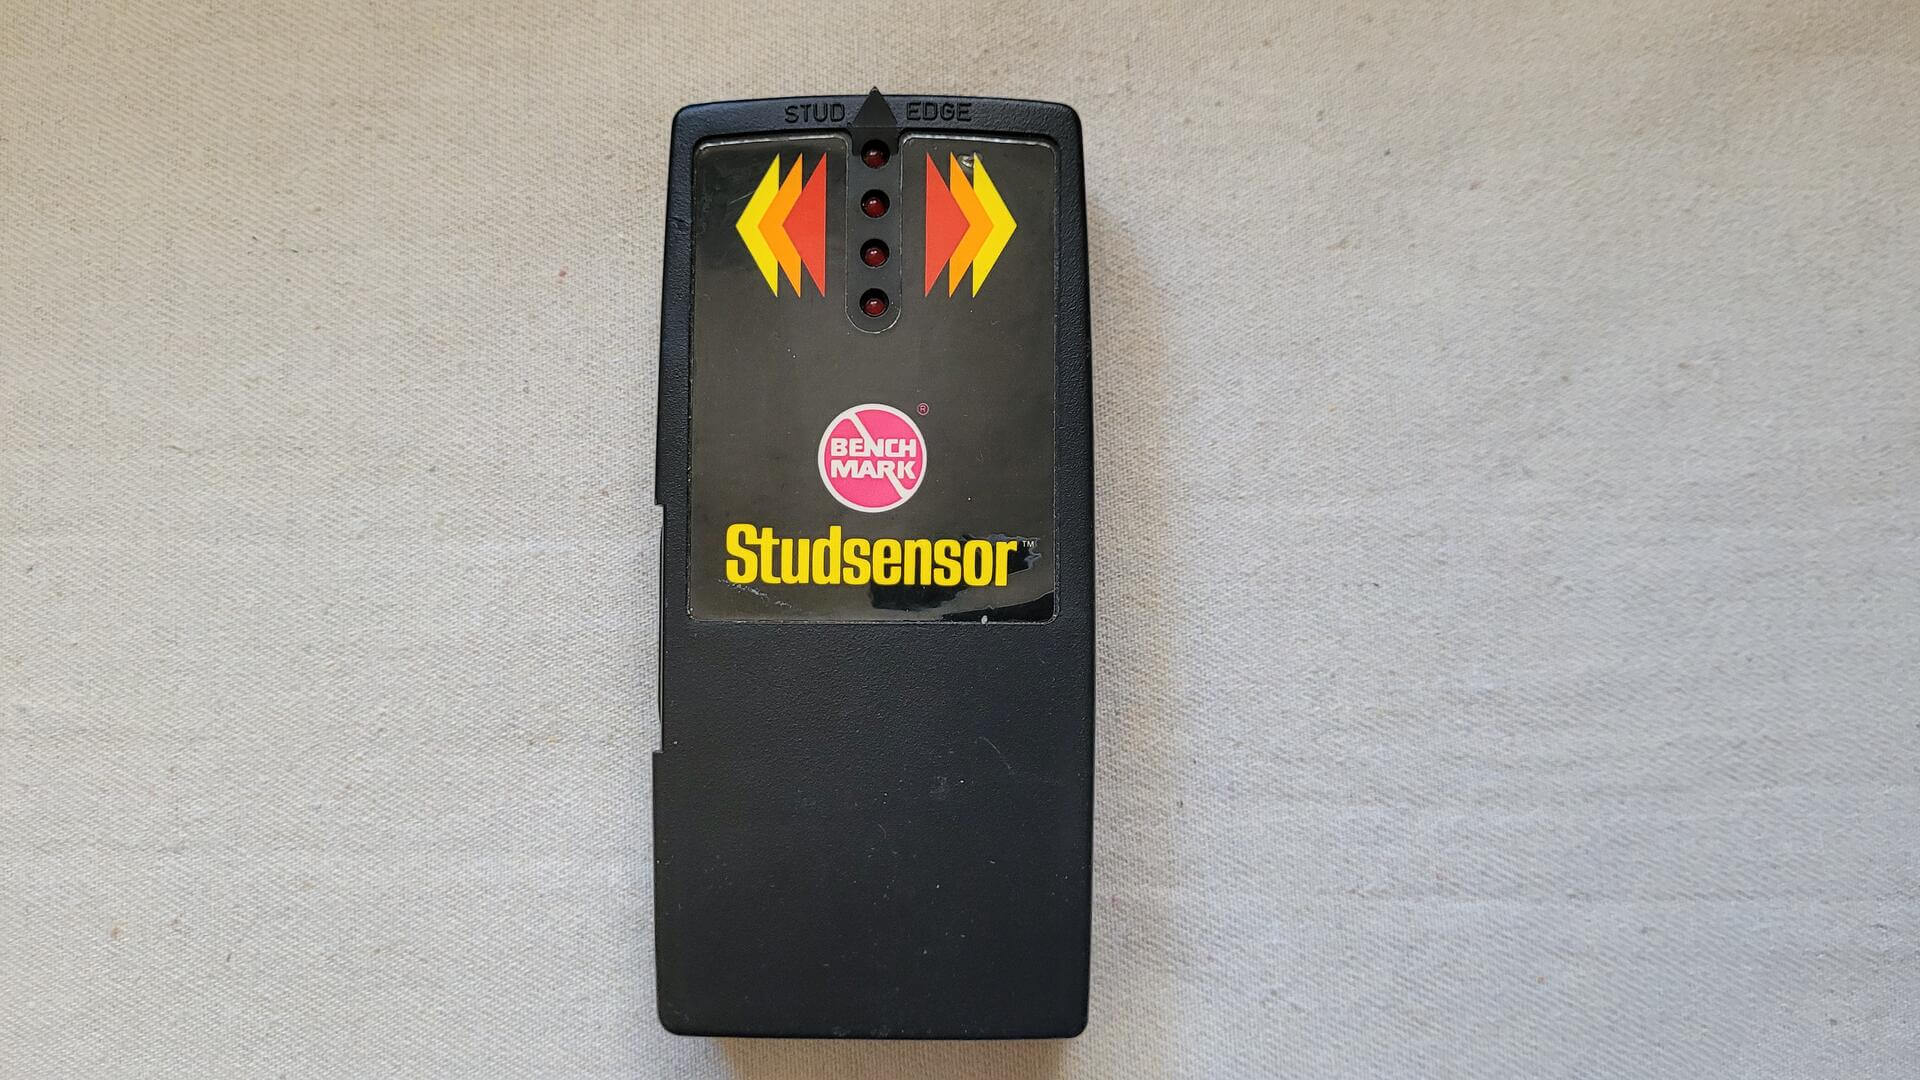 Rare vintage Benchmark Studsensor battery powered hendheld wall stud finder with red LED indicator lights in working condition - 1980s Retro collectible measuring and marking tools